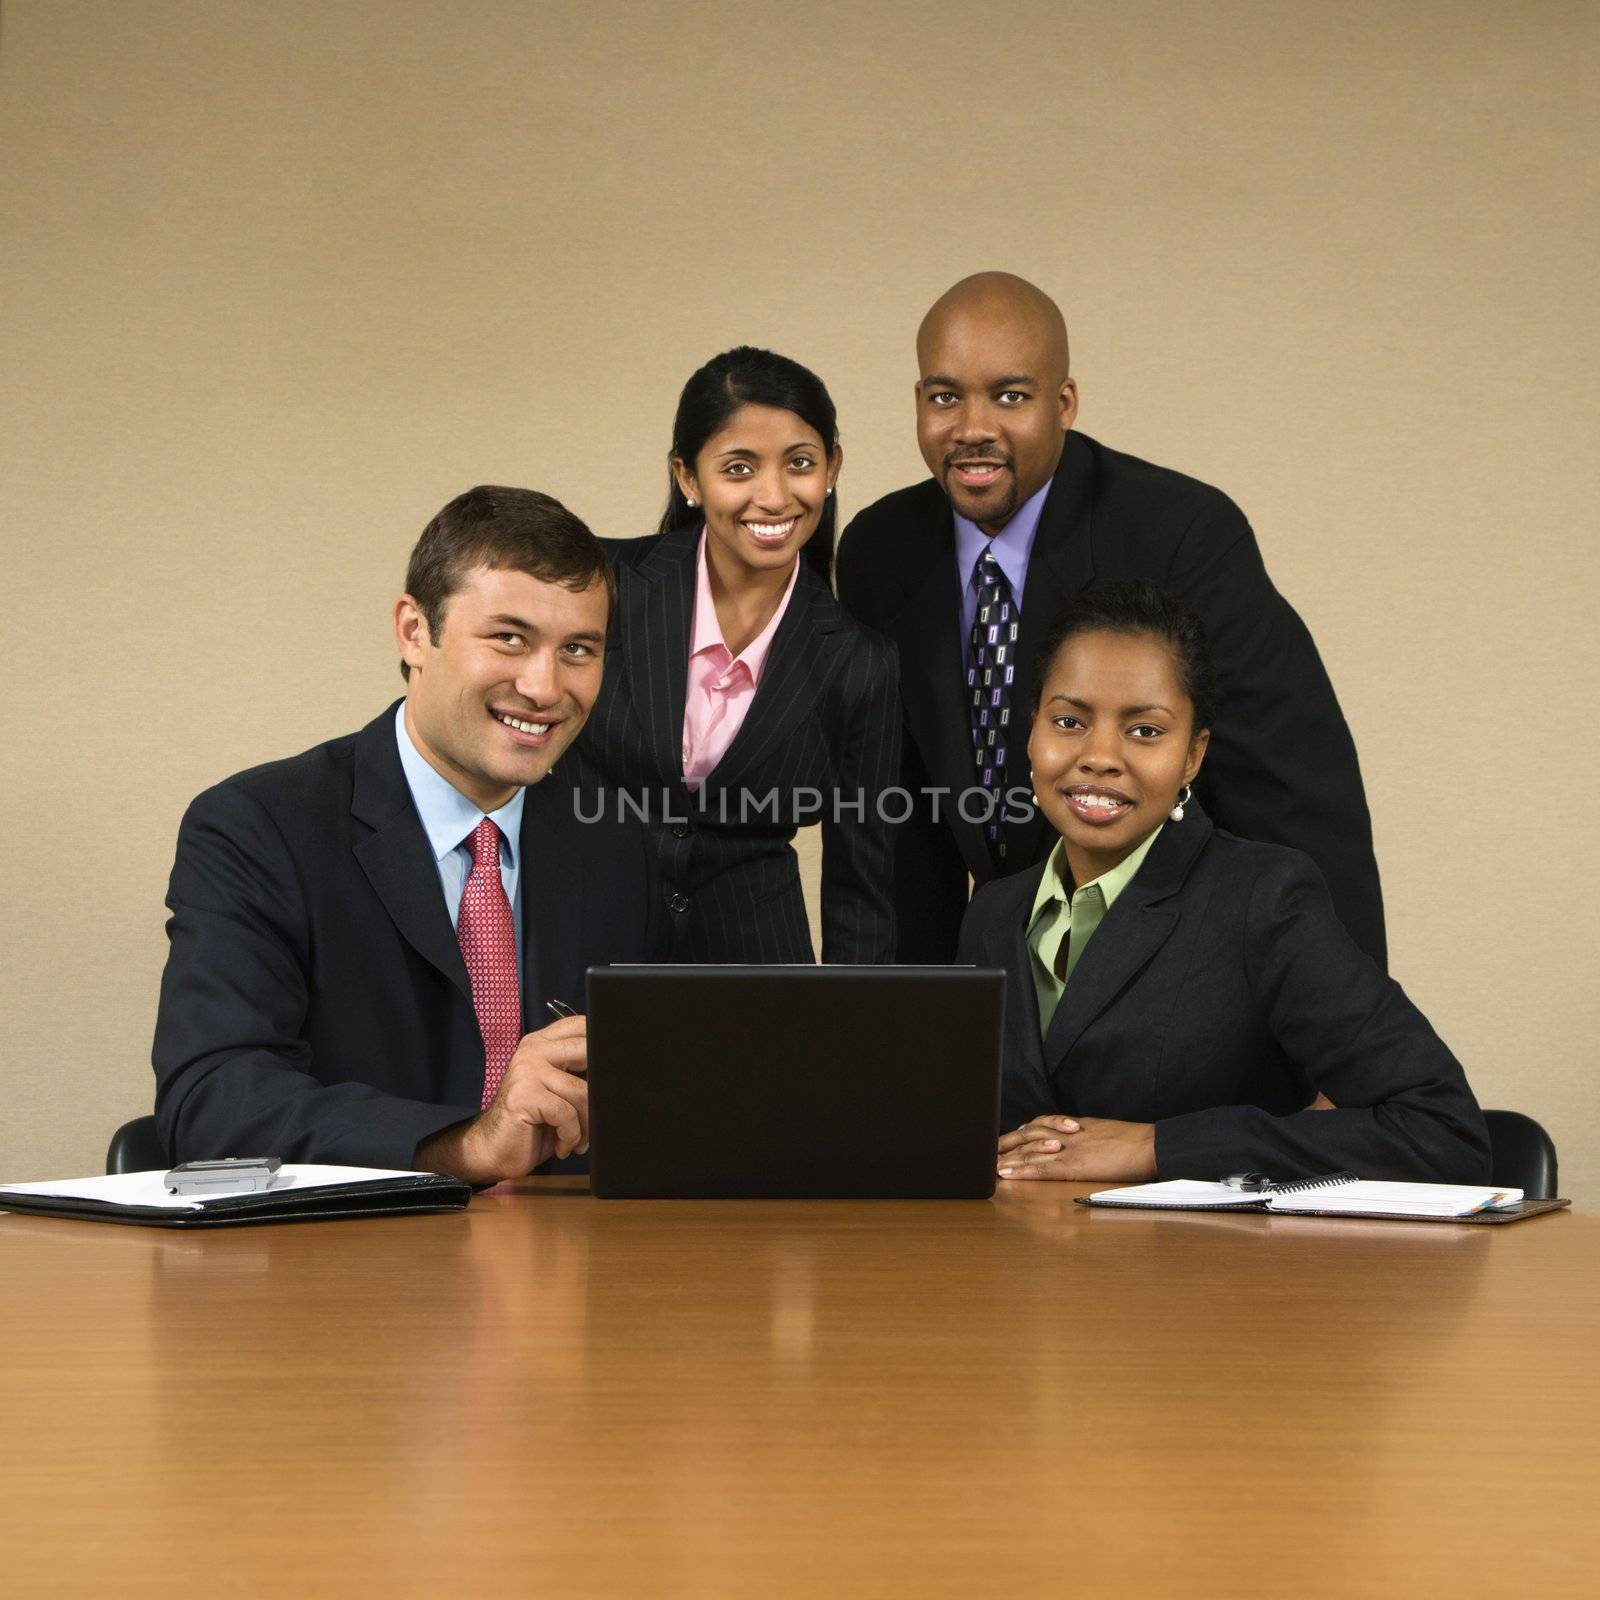 Businesspeople gathered around laptop computer smiling.